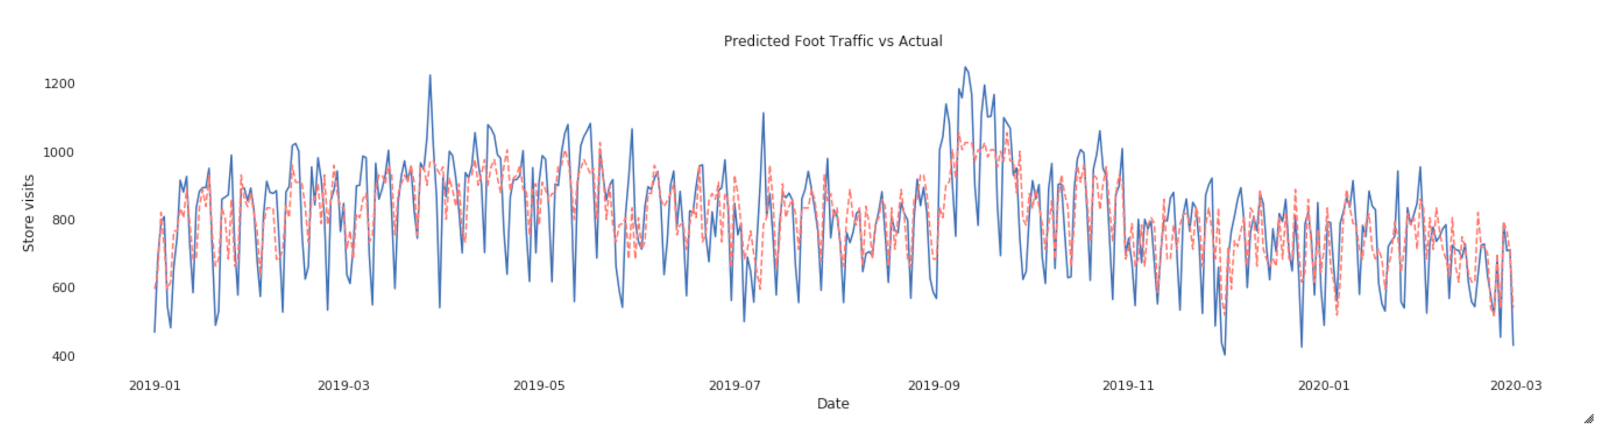 With Databricks’ marketing mix analytics solution, one can use HyperOpt to automatically distribute a tuning job across a Spark cluster to, for example, find the optimal model to forecast intore traffic for a specific city.